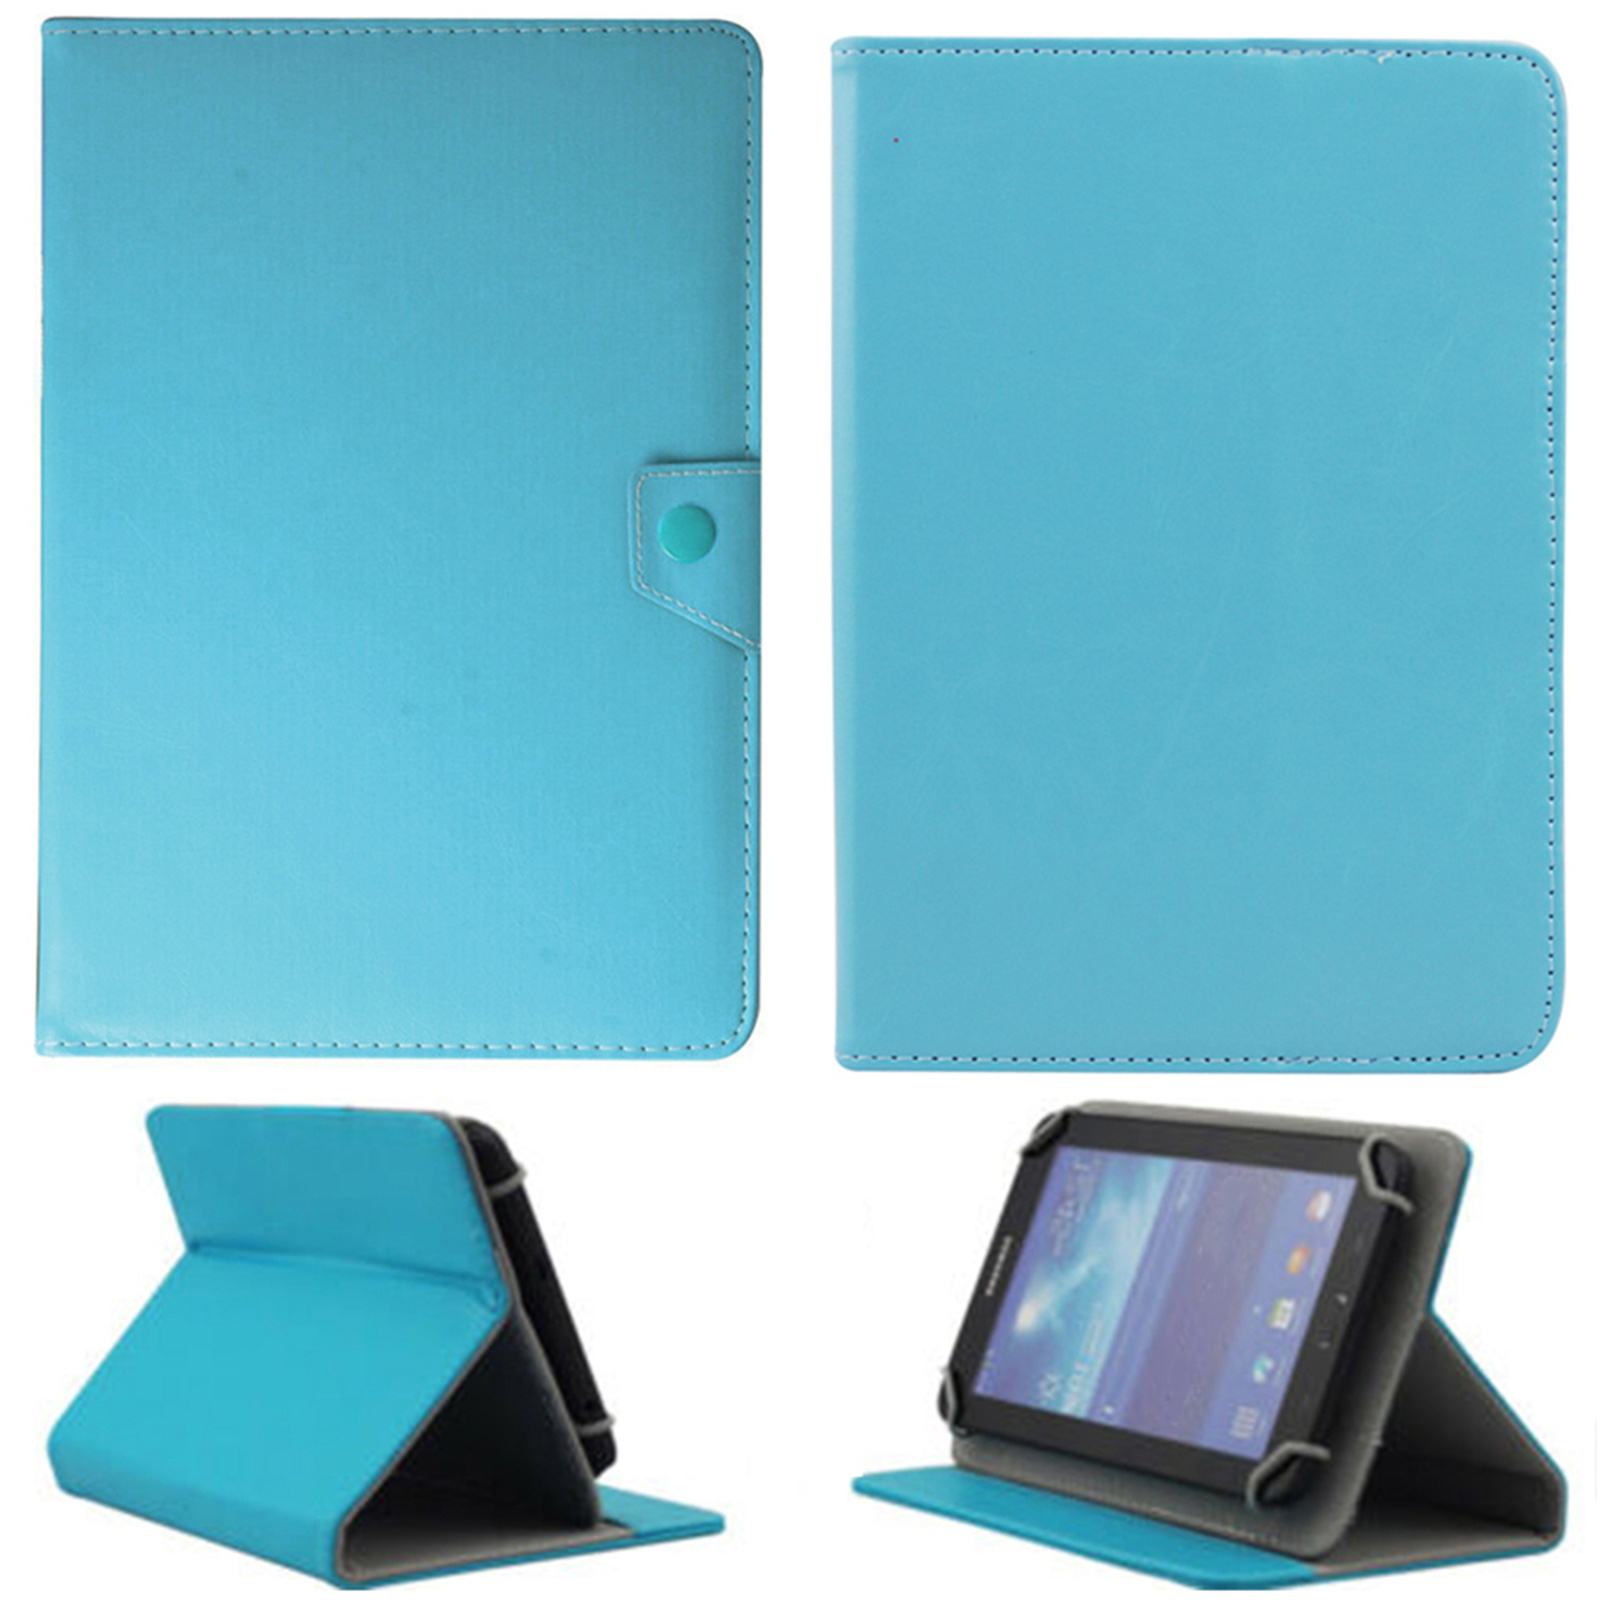 For DOOGEE T20S, Premium PU leather Stand with Multi-angle Business Folio  Cover